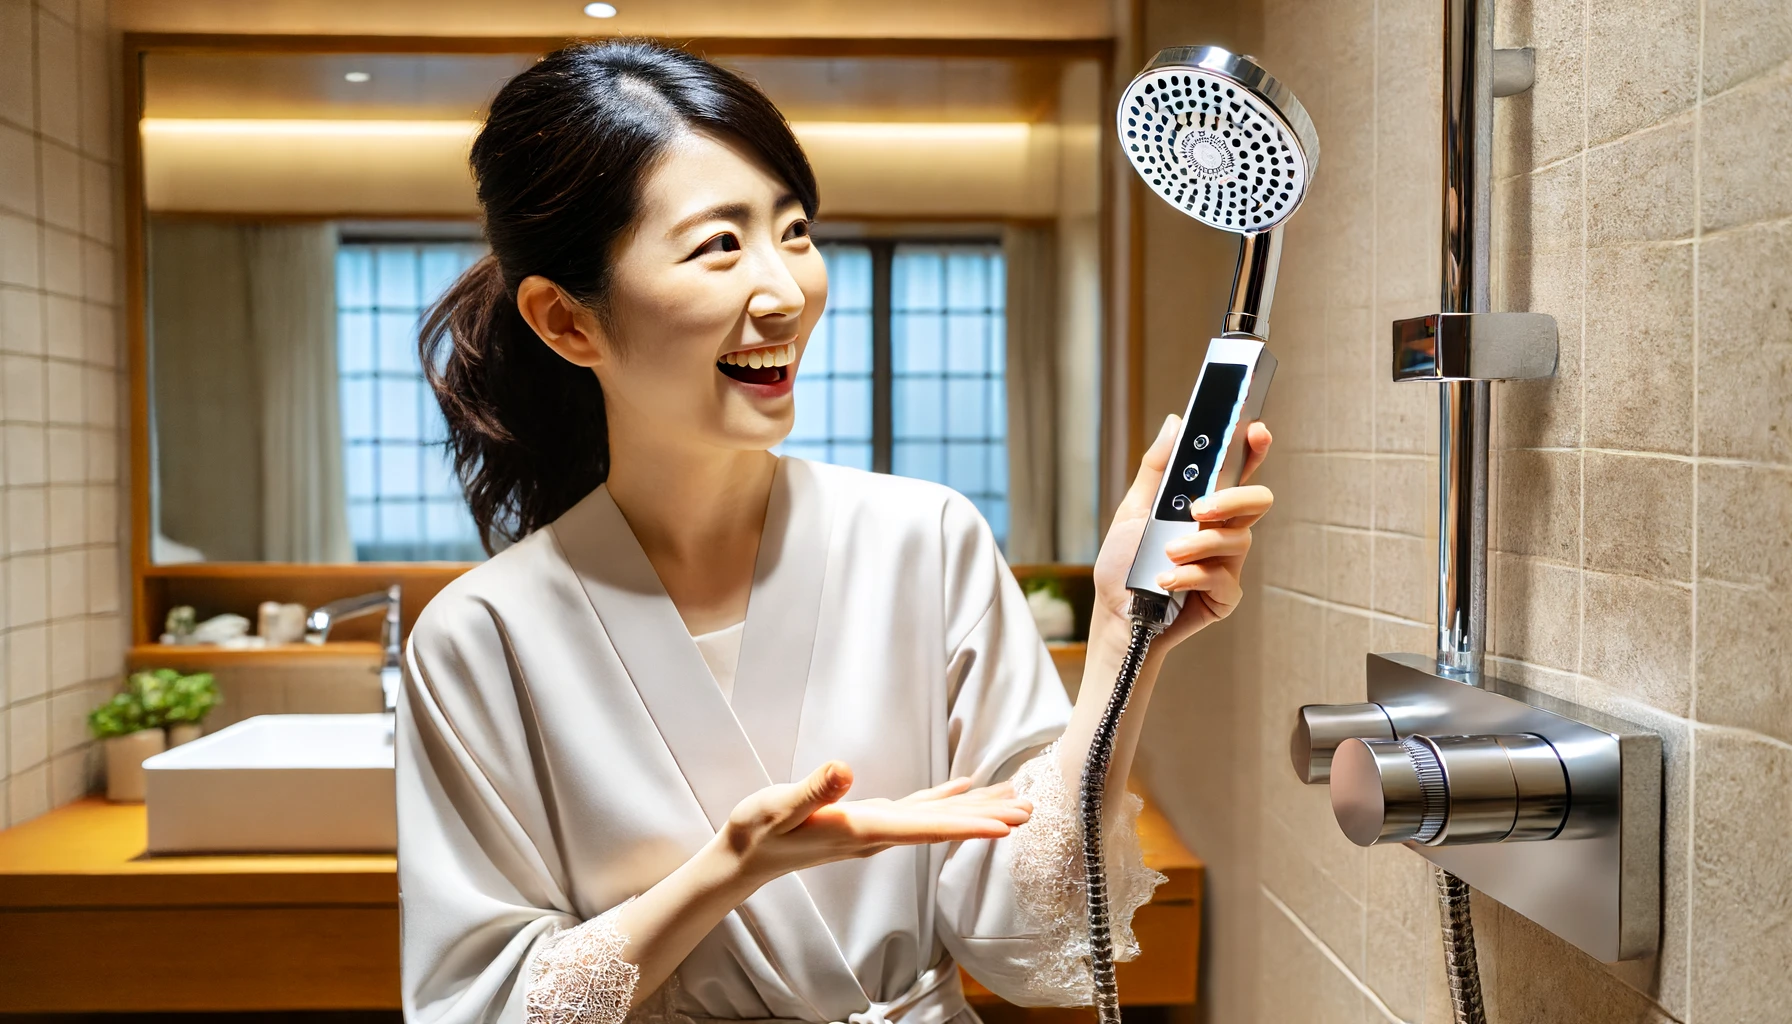 A Japanese woman using a luxury handheld shower head for the first time, showing a look of amazement and joy. The modern bathroom has elegant design features, and the shower head is sleek and high-end.